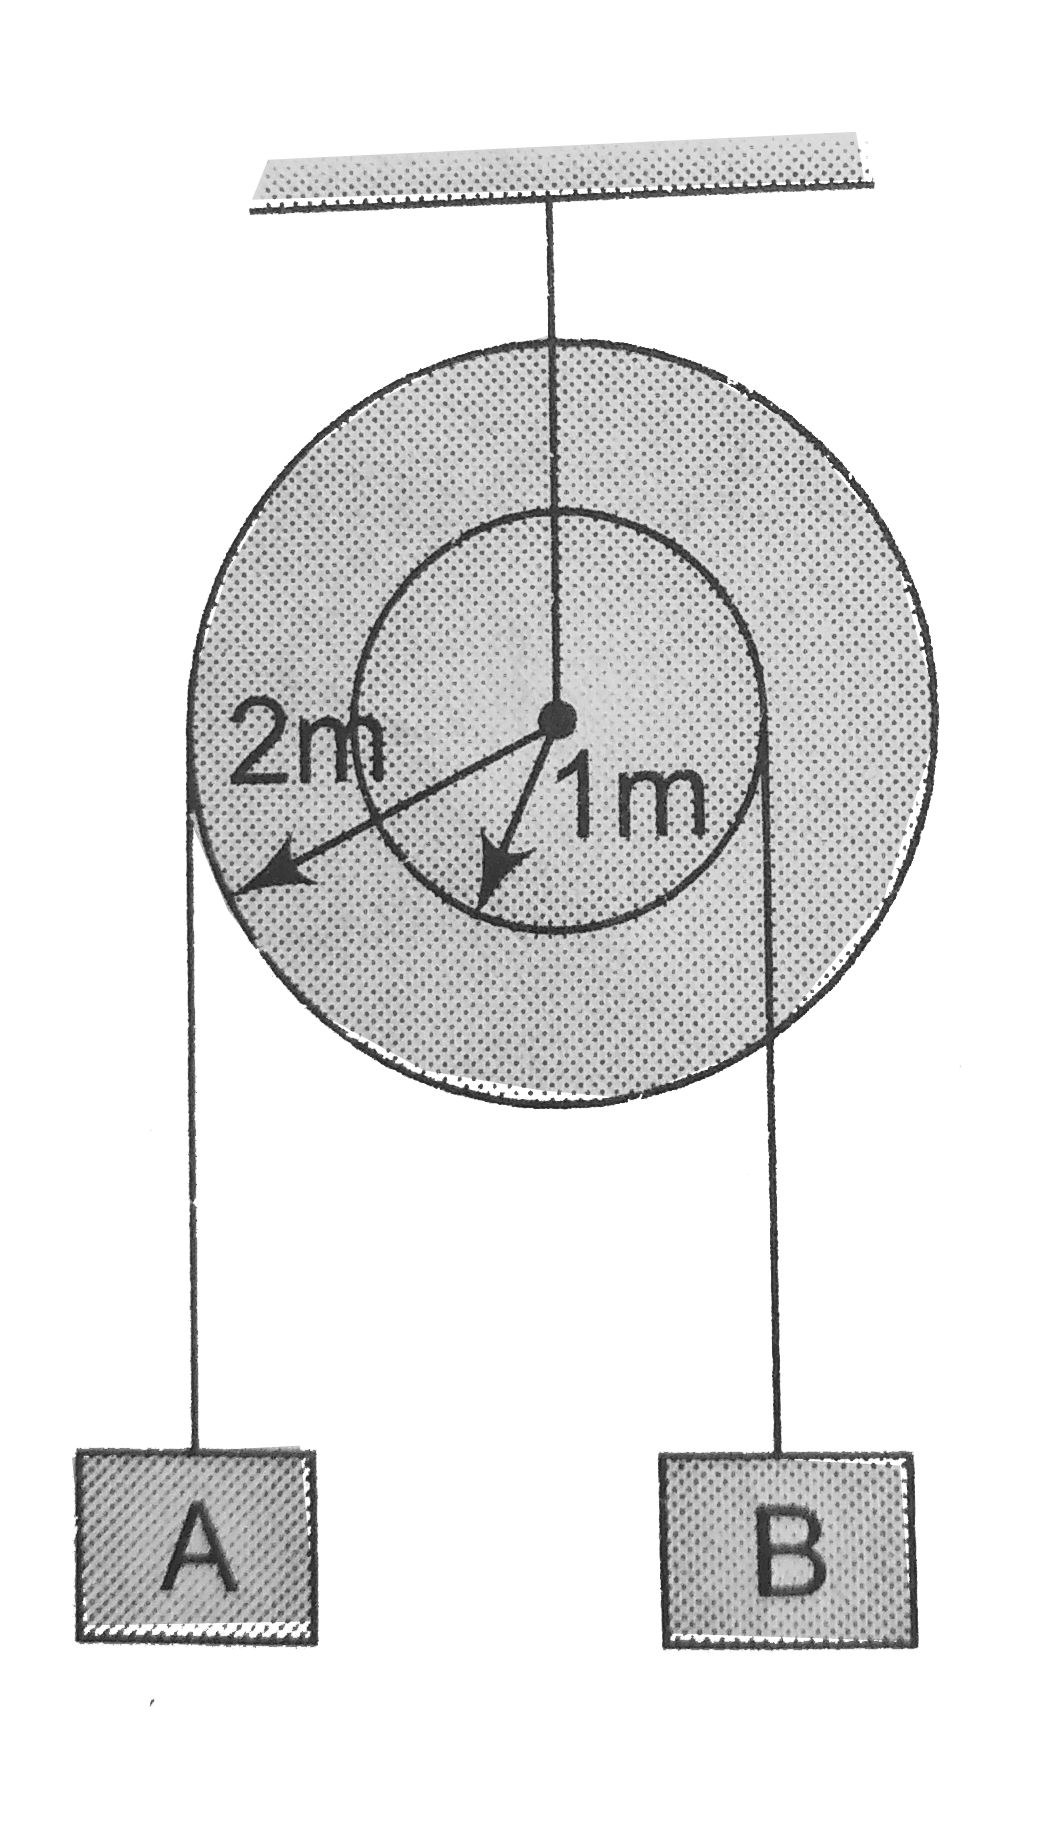 In the pulley system shown, if radii of the bigger and smaller pulley are 2 m and 1 m respectively and the acceleration of block A is 5 m//s^2 in the downward direction, then the acceleration of block B will be :   .